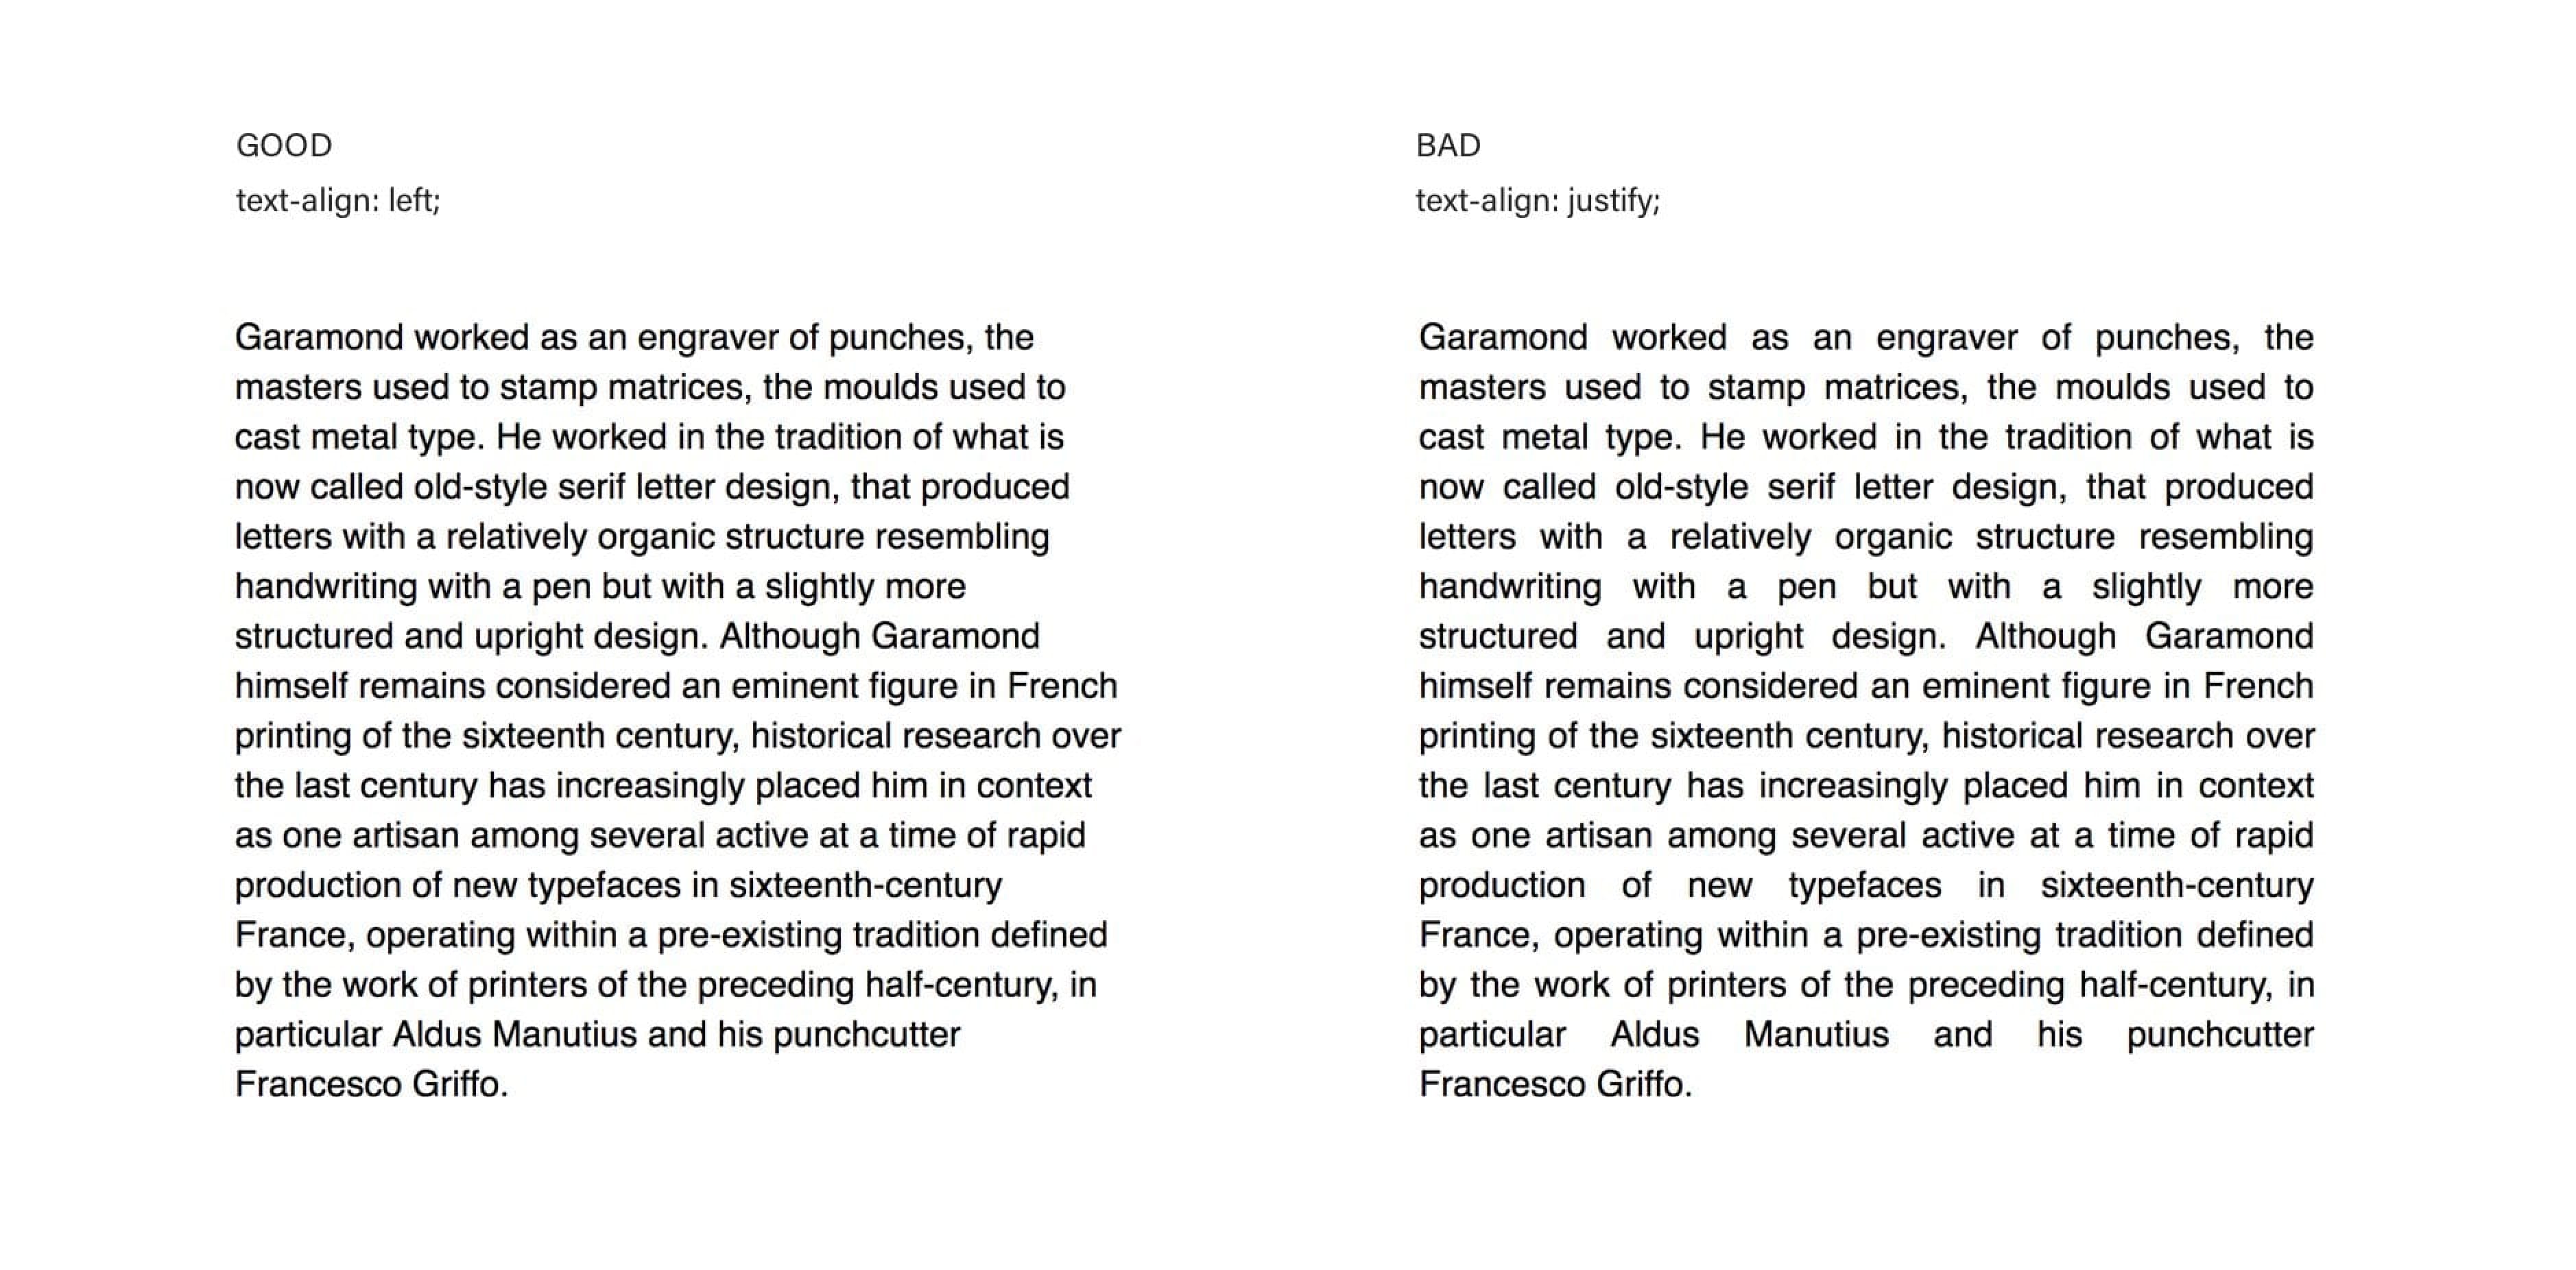 Comparing left-aligned and justified text on the web (no hyphenation).